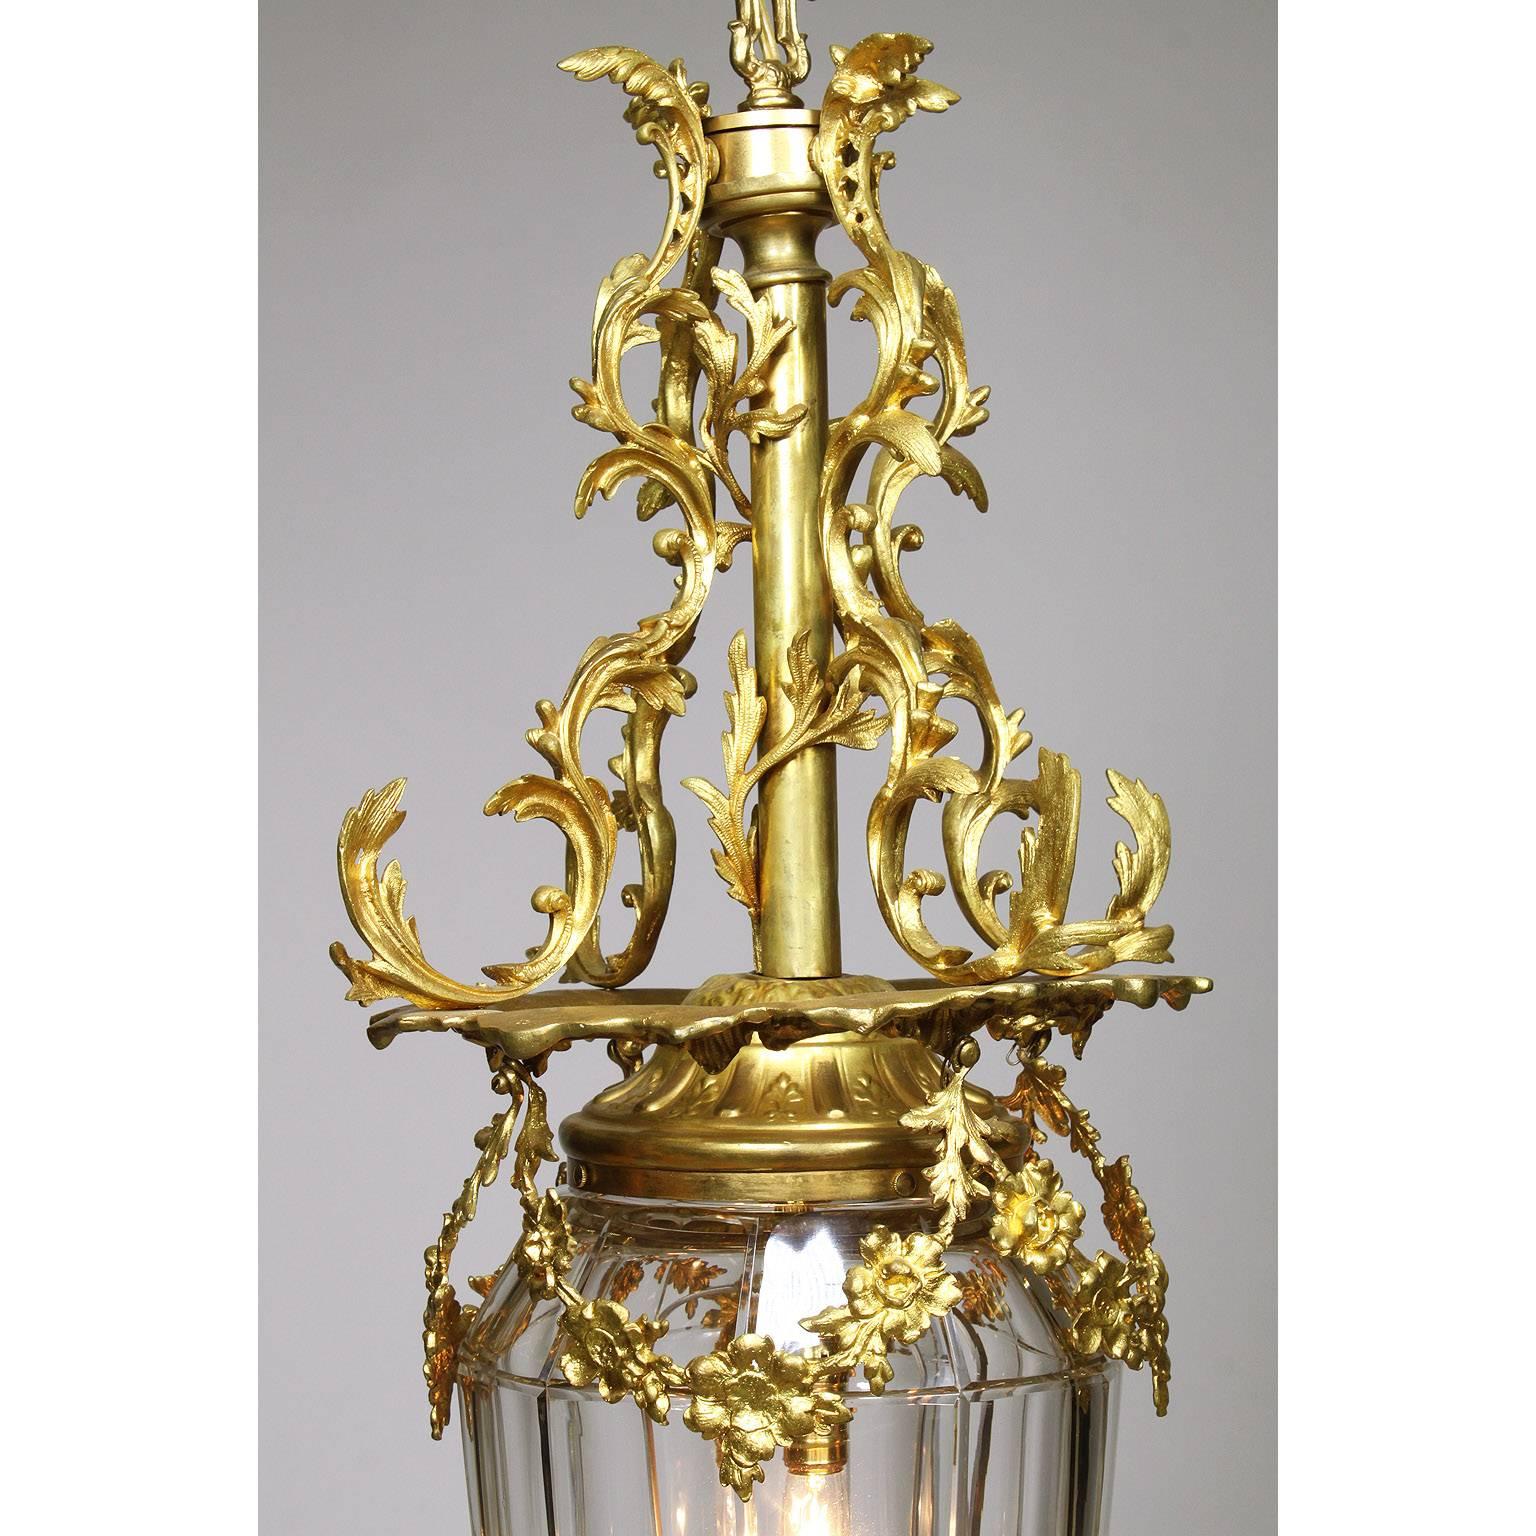 Rococo Revival French 19th-20th Century Gilt-Bronze and Molded Glass 